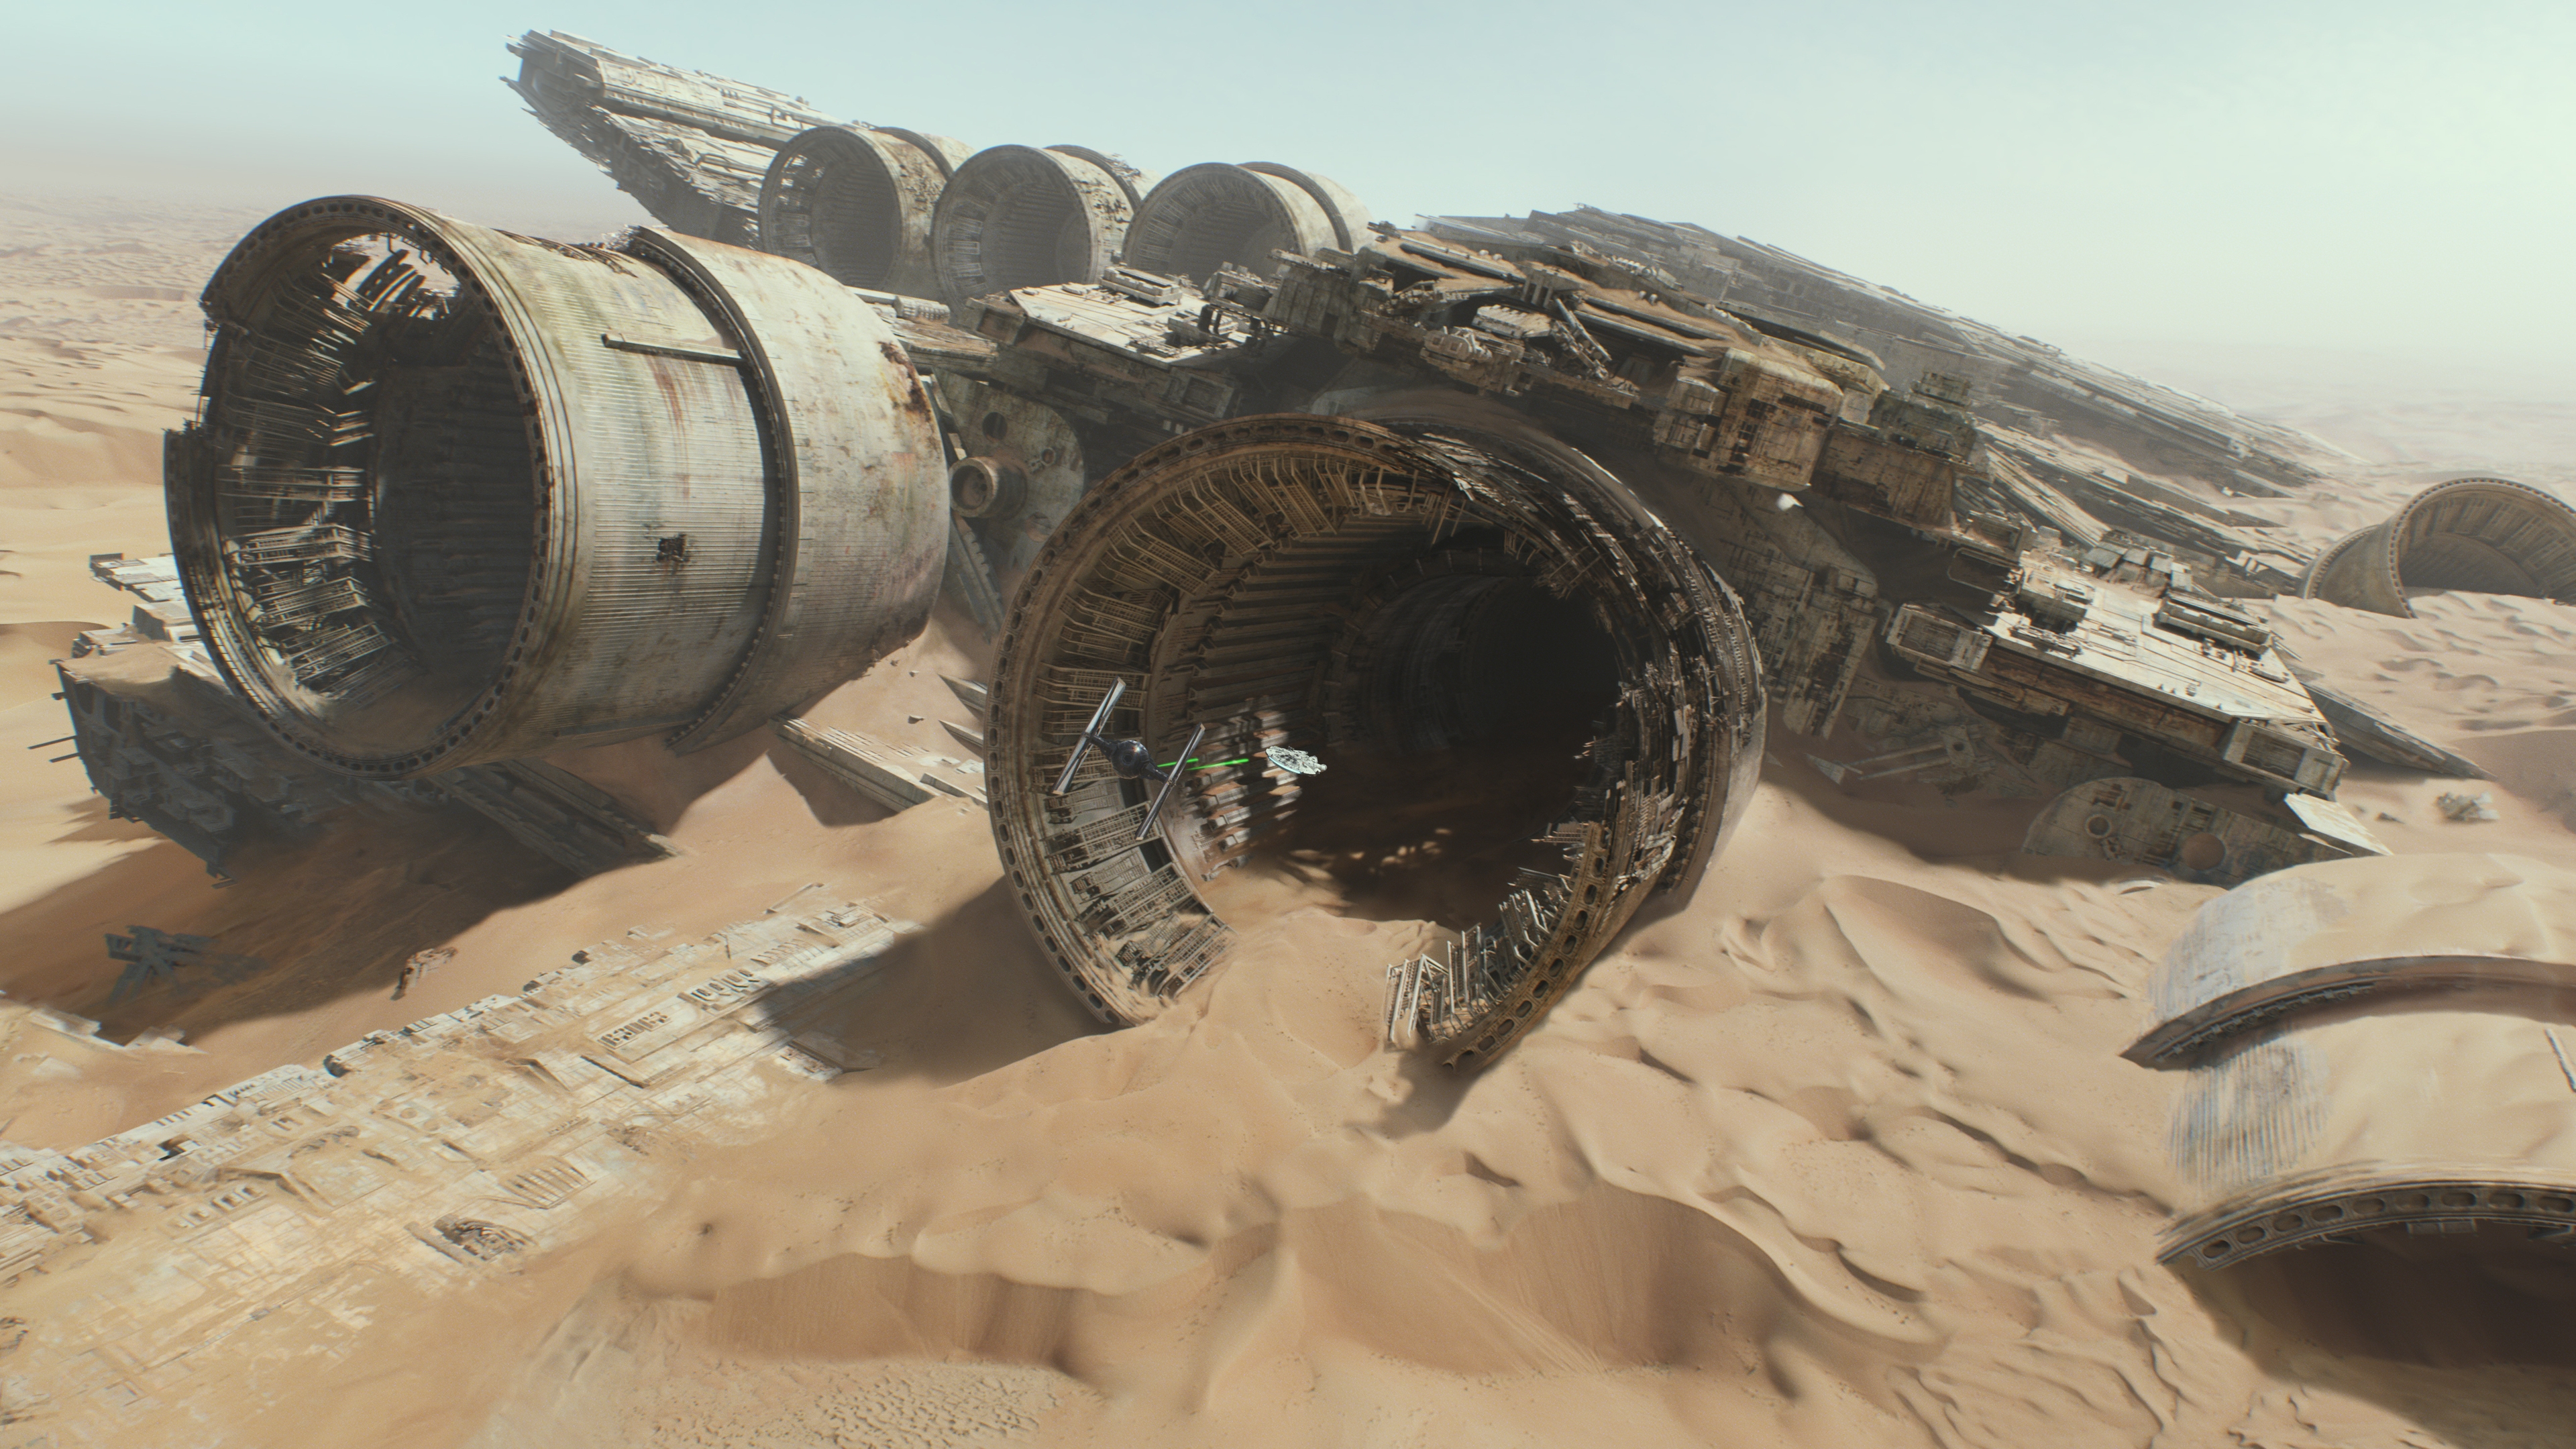 Star Wars The Force Awakens Ship for 3840 x 2160 Ultra HD resolution